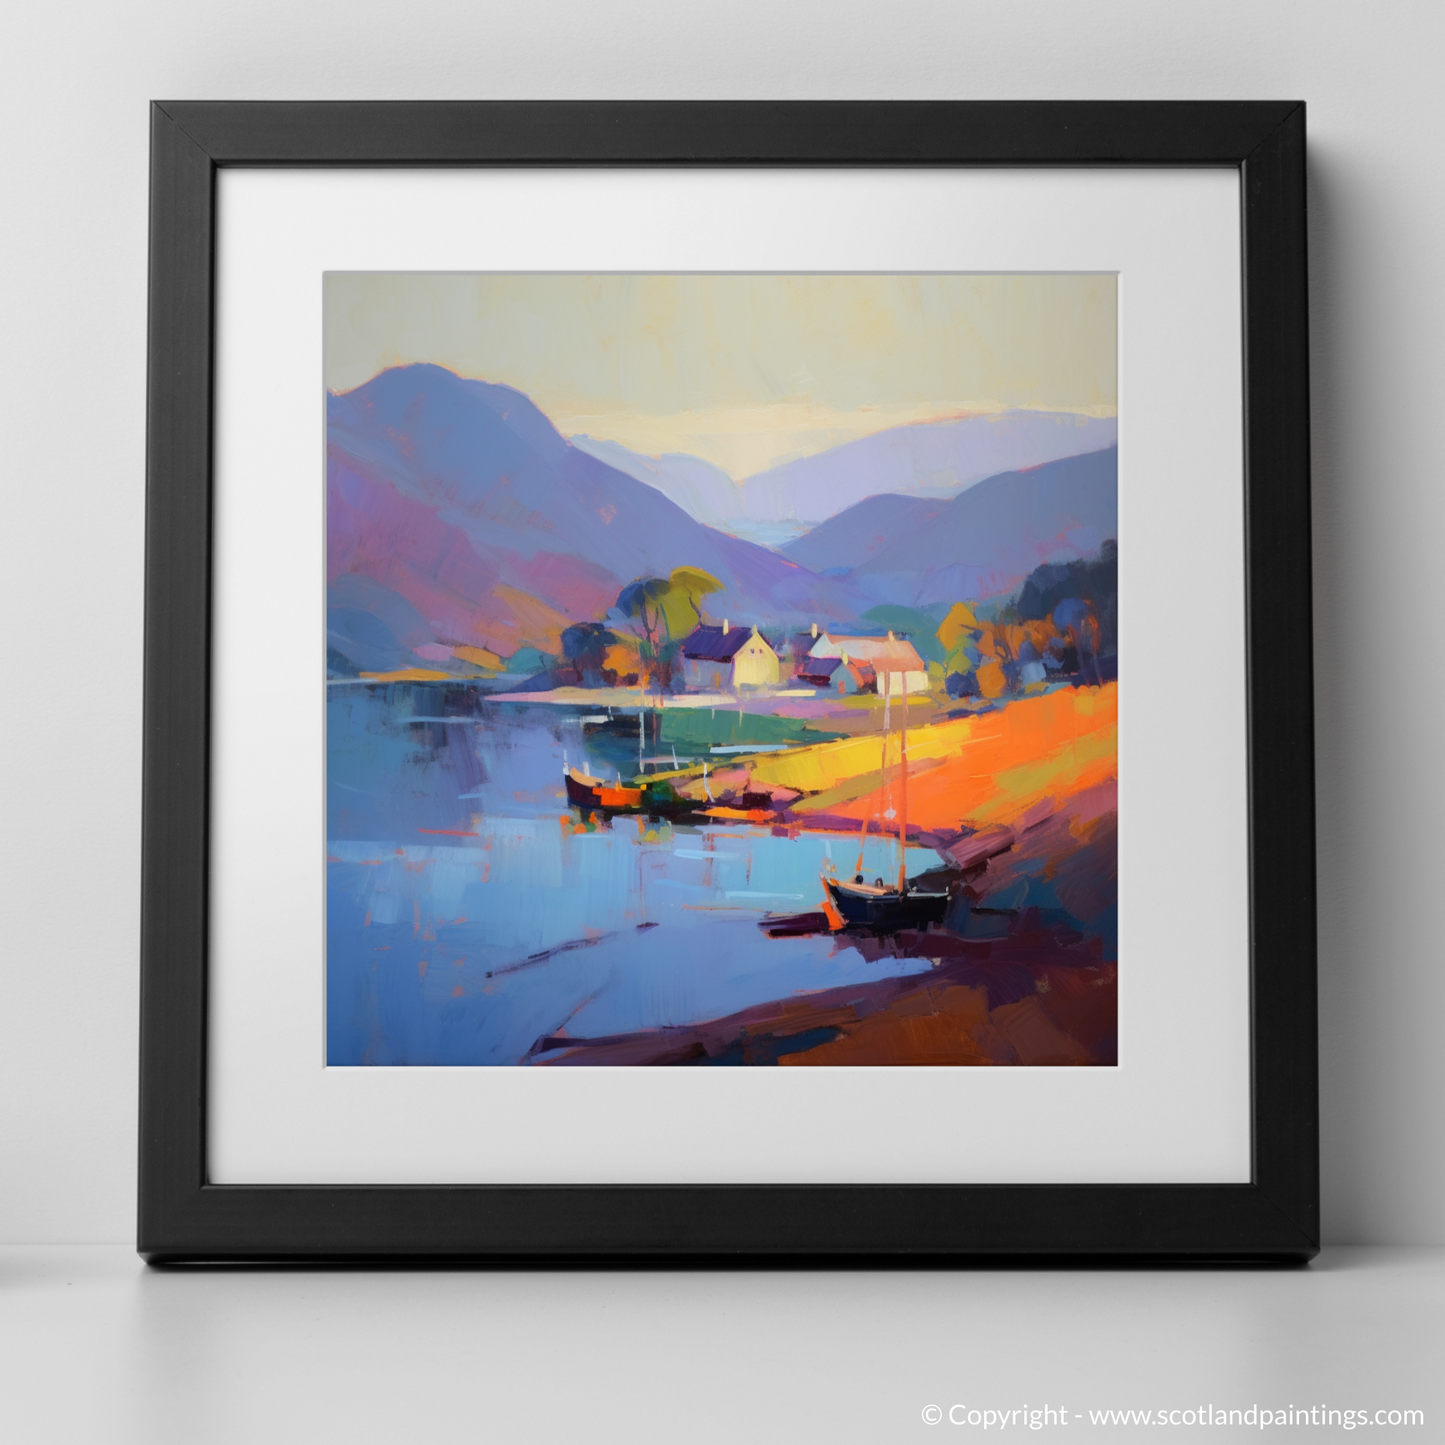 Golden Hour at Mallaig Harbour: An Expressionist Ode to Scotland's Coastal Beauty